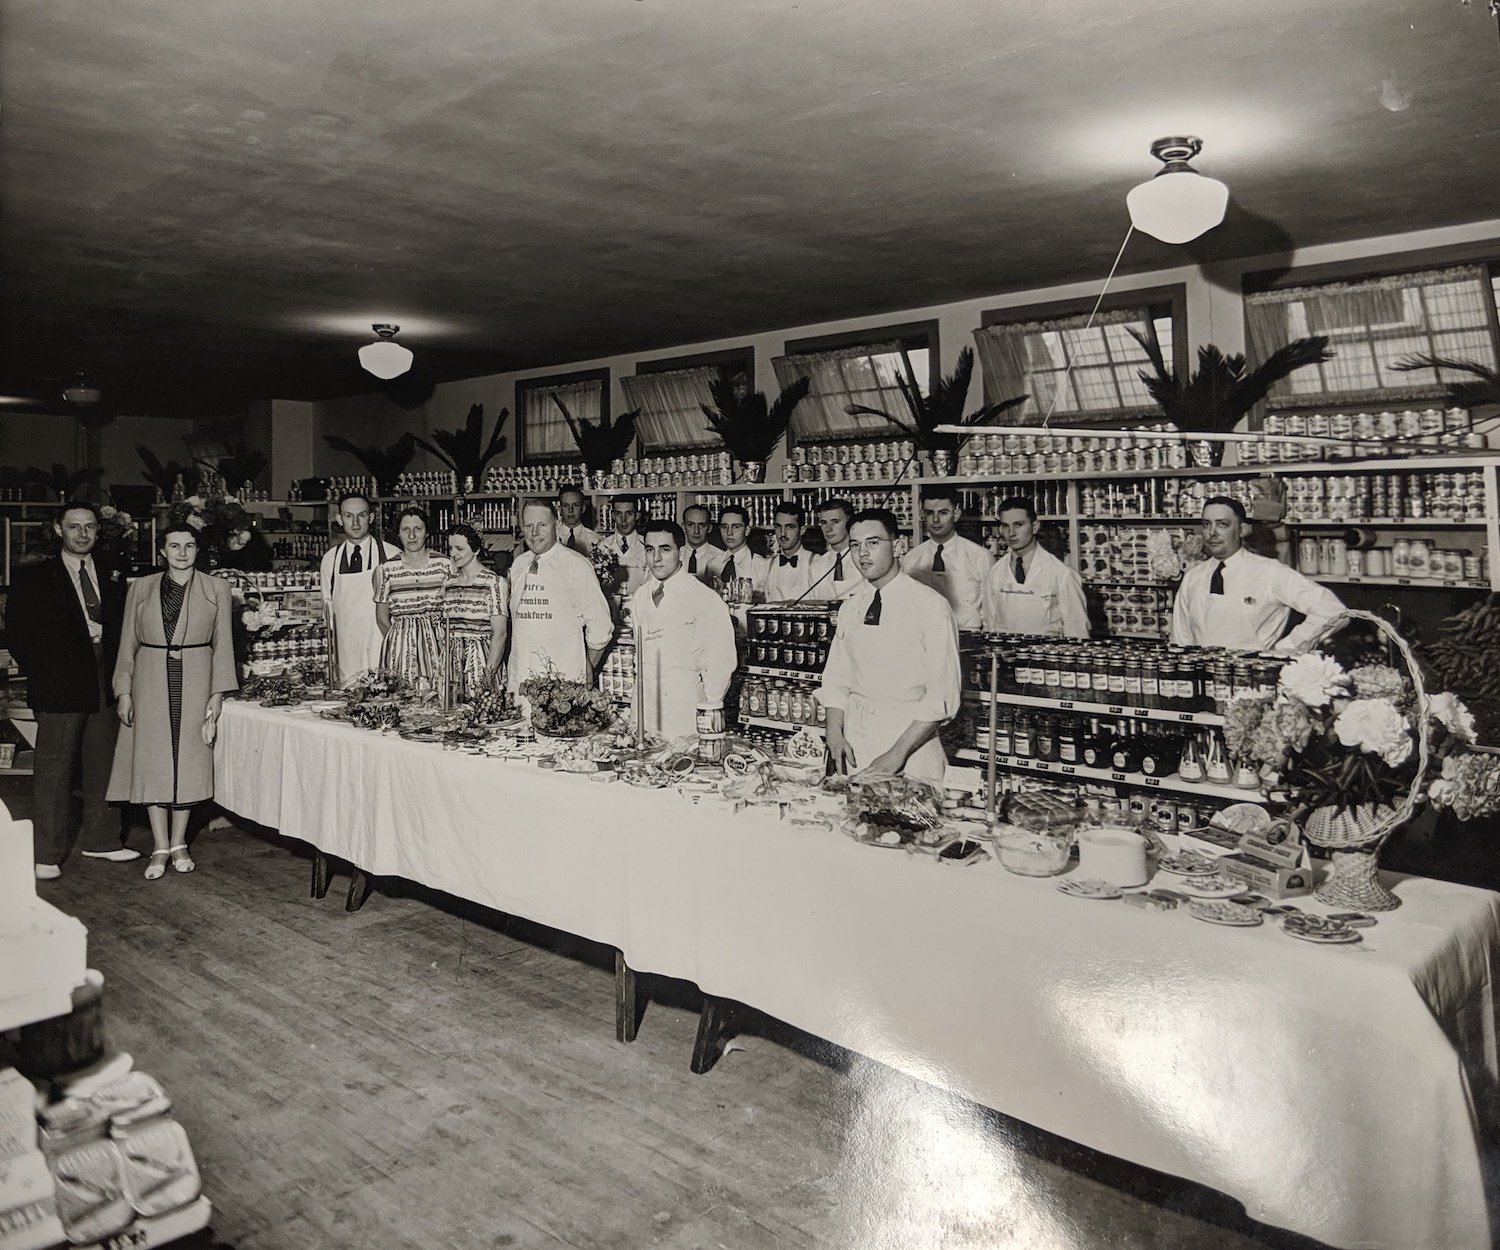 The history of small, local groceries in Boise, Idaho.